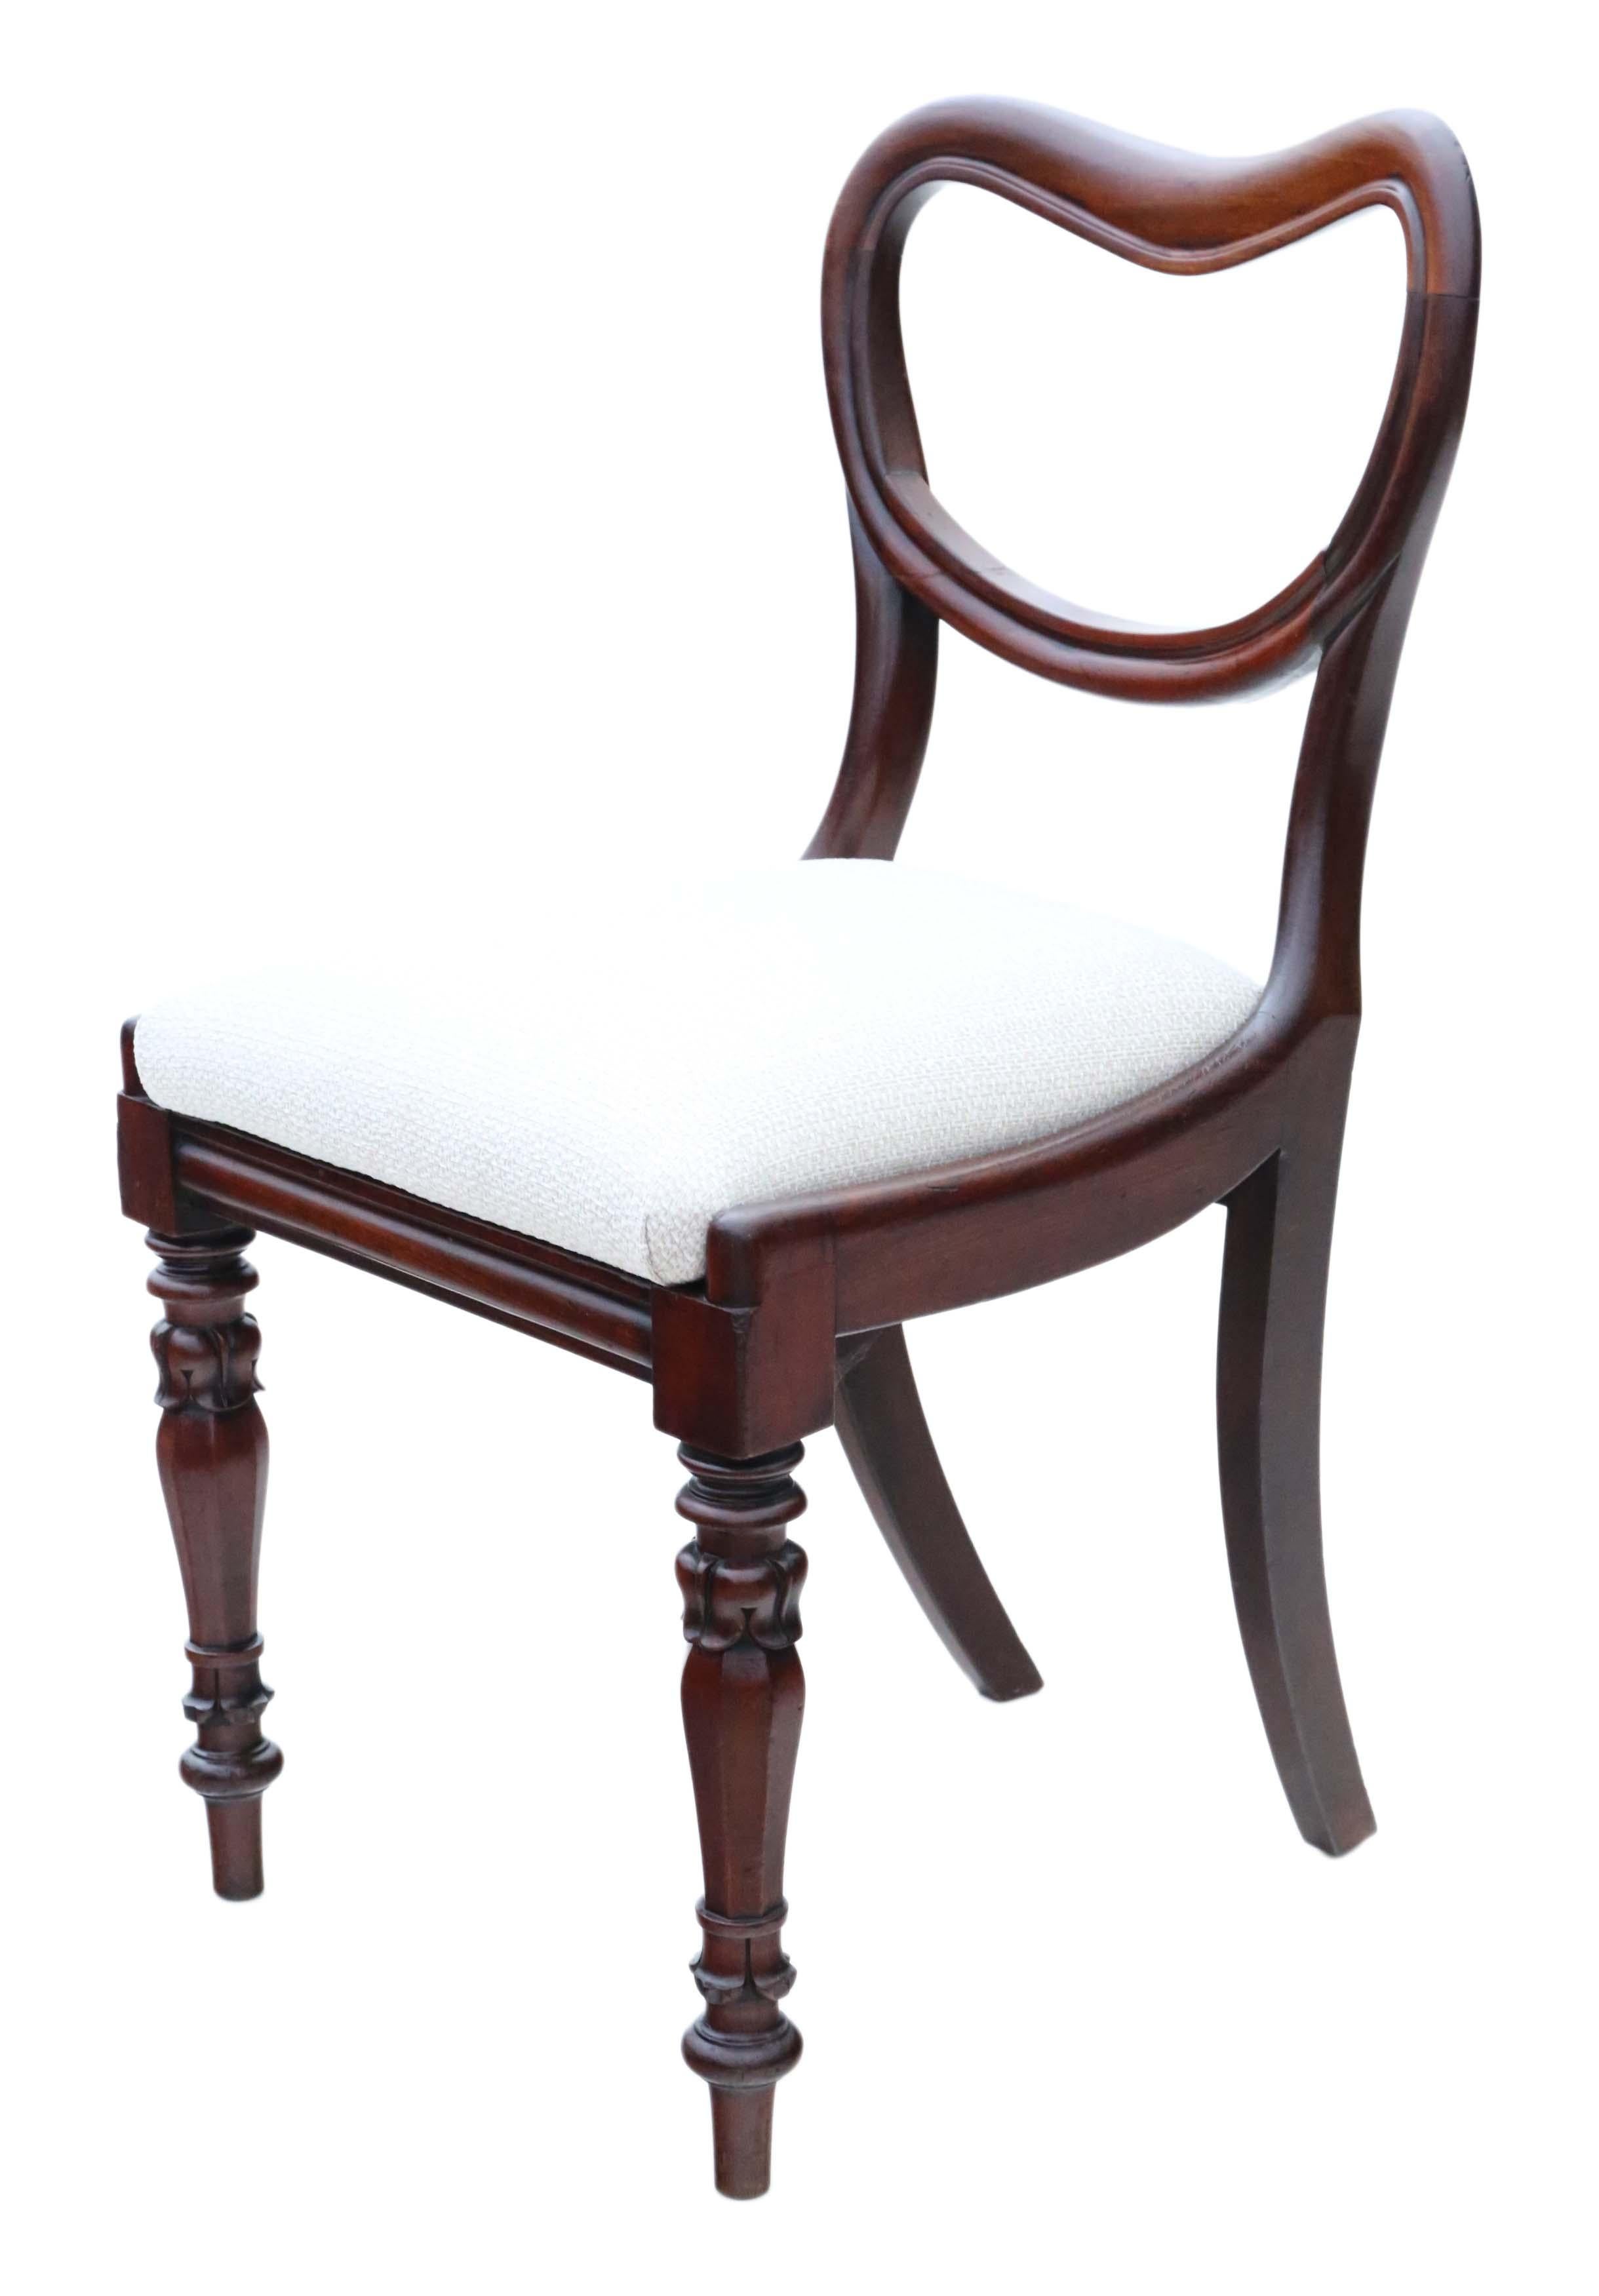 Mid-19th Century Antique Set of 6 William IV Mahogany Balloon Back Dining Chairs, circa 1835